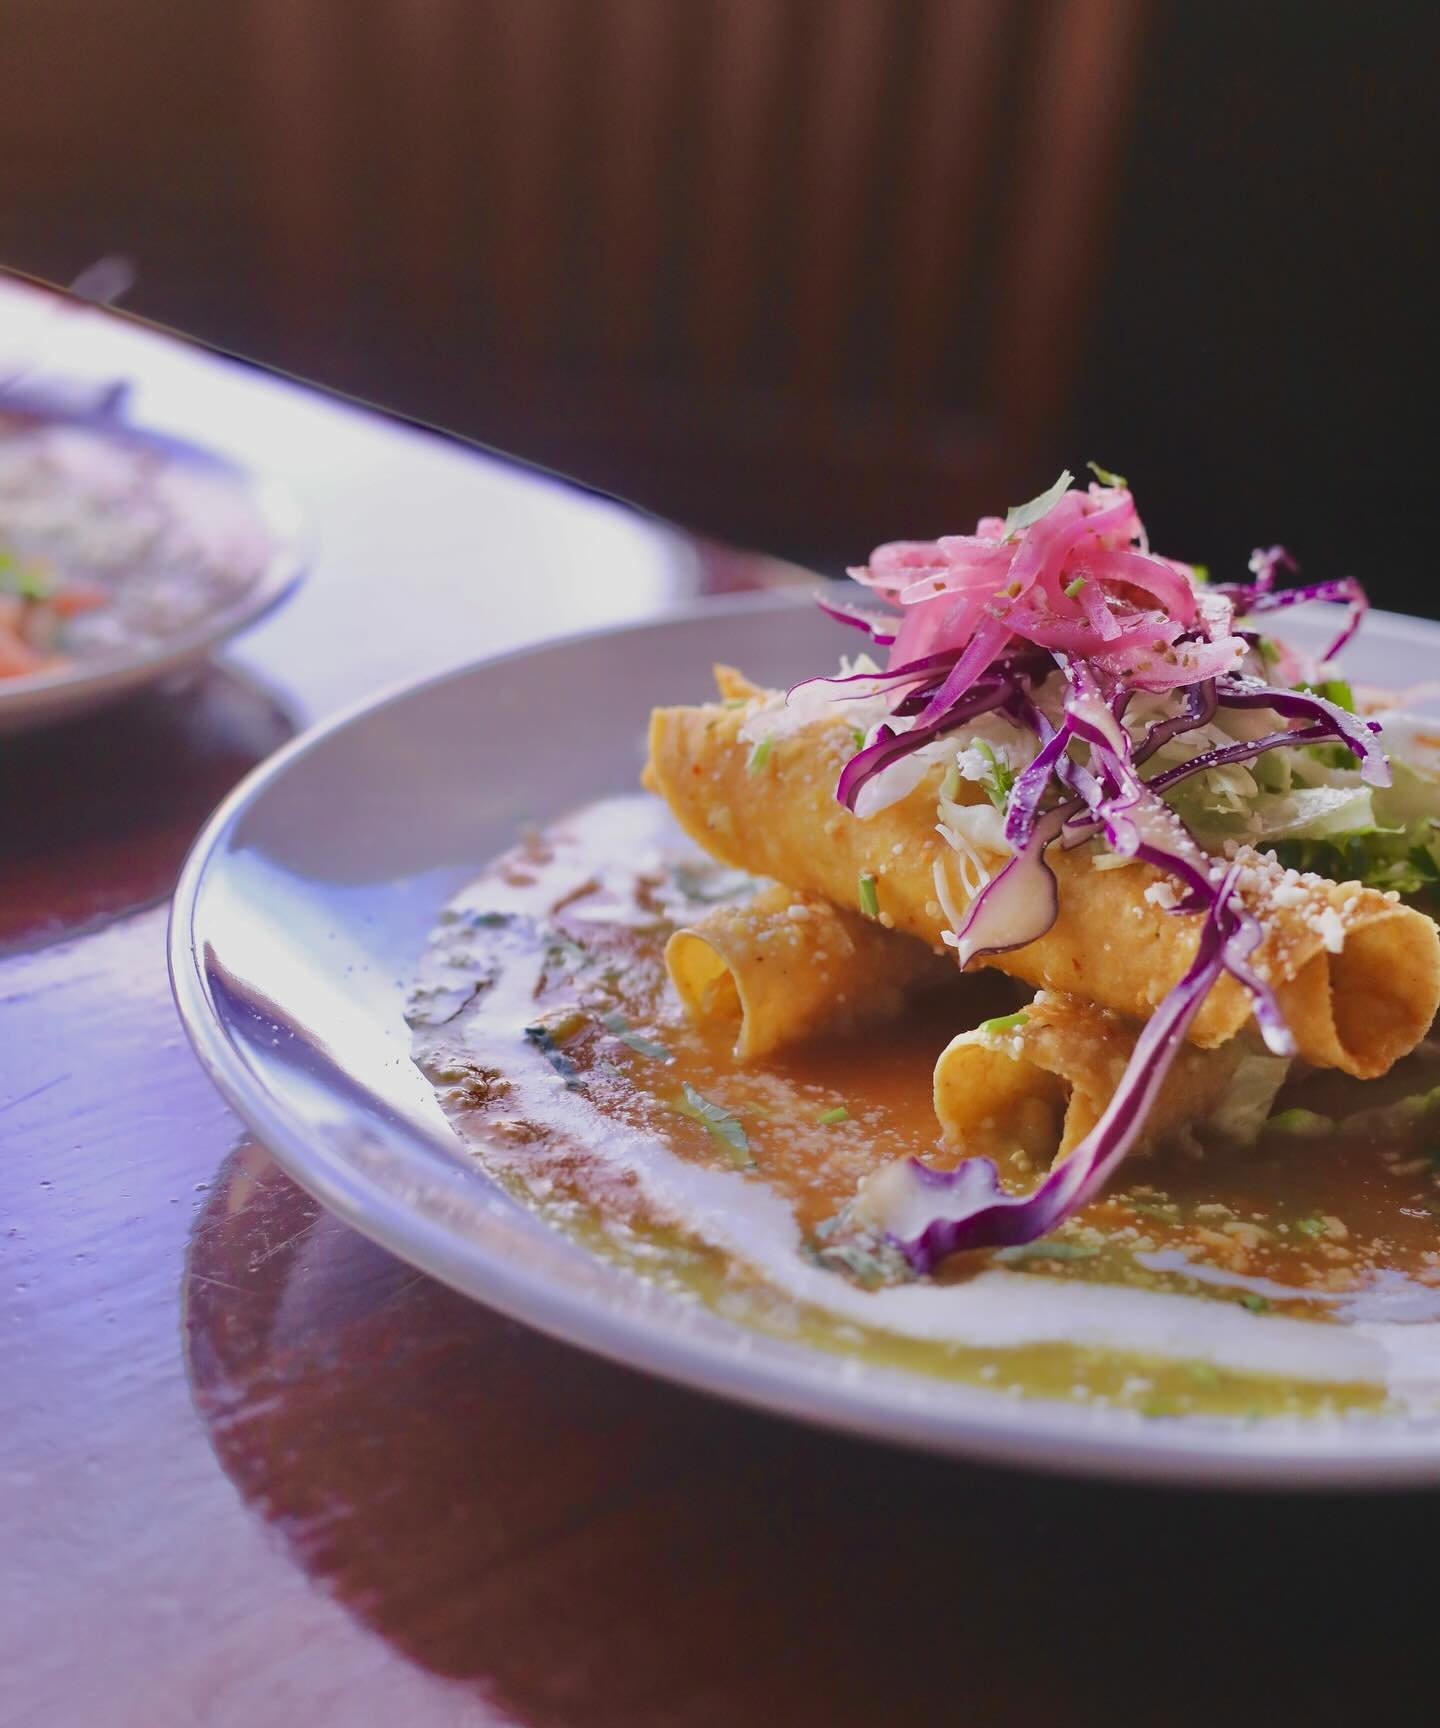 What are you having for lunch today? We&rsquo;re diving into some delicious Flautas! Pollo rolled into corn tortillas and fried crisp, topped with house salsas, shredded romaine, shaved cabbage, crema, cotija, pickled onion, and cilantro. Come on by 